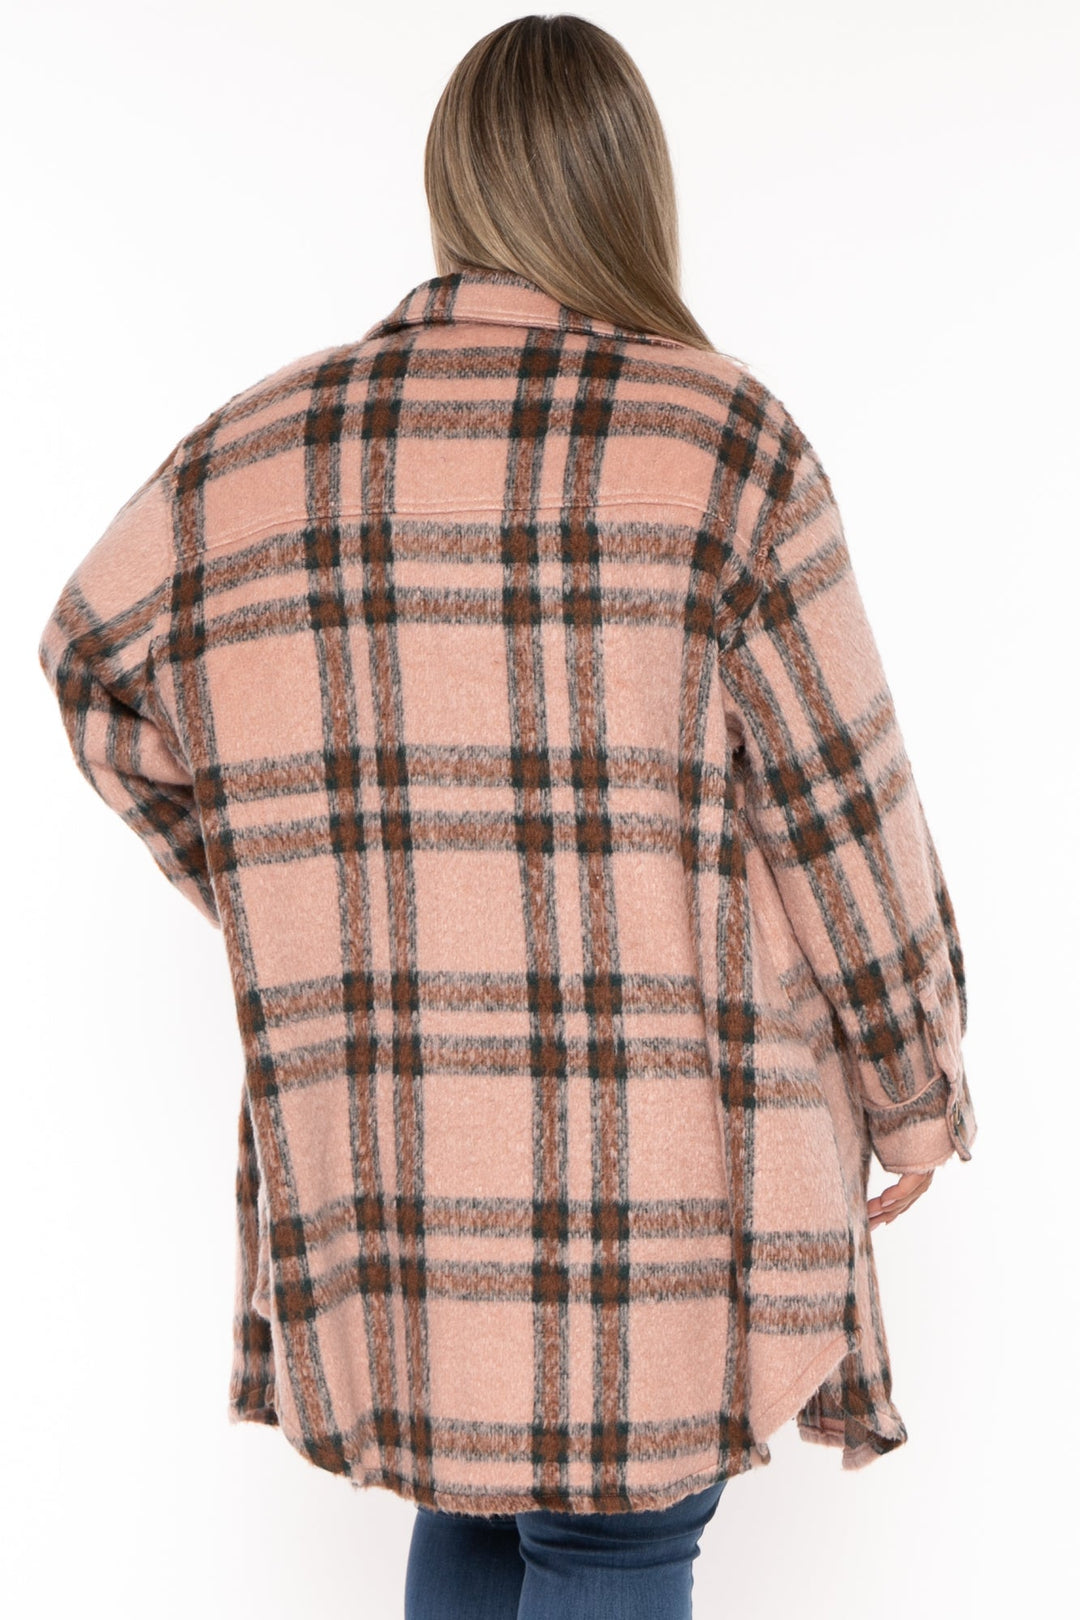 GEE GEE Jackets And Outerwear Plus Size Plaid Long Coat- Mauve